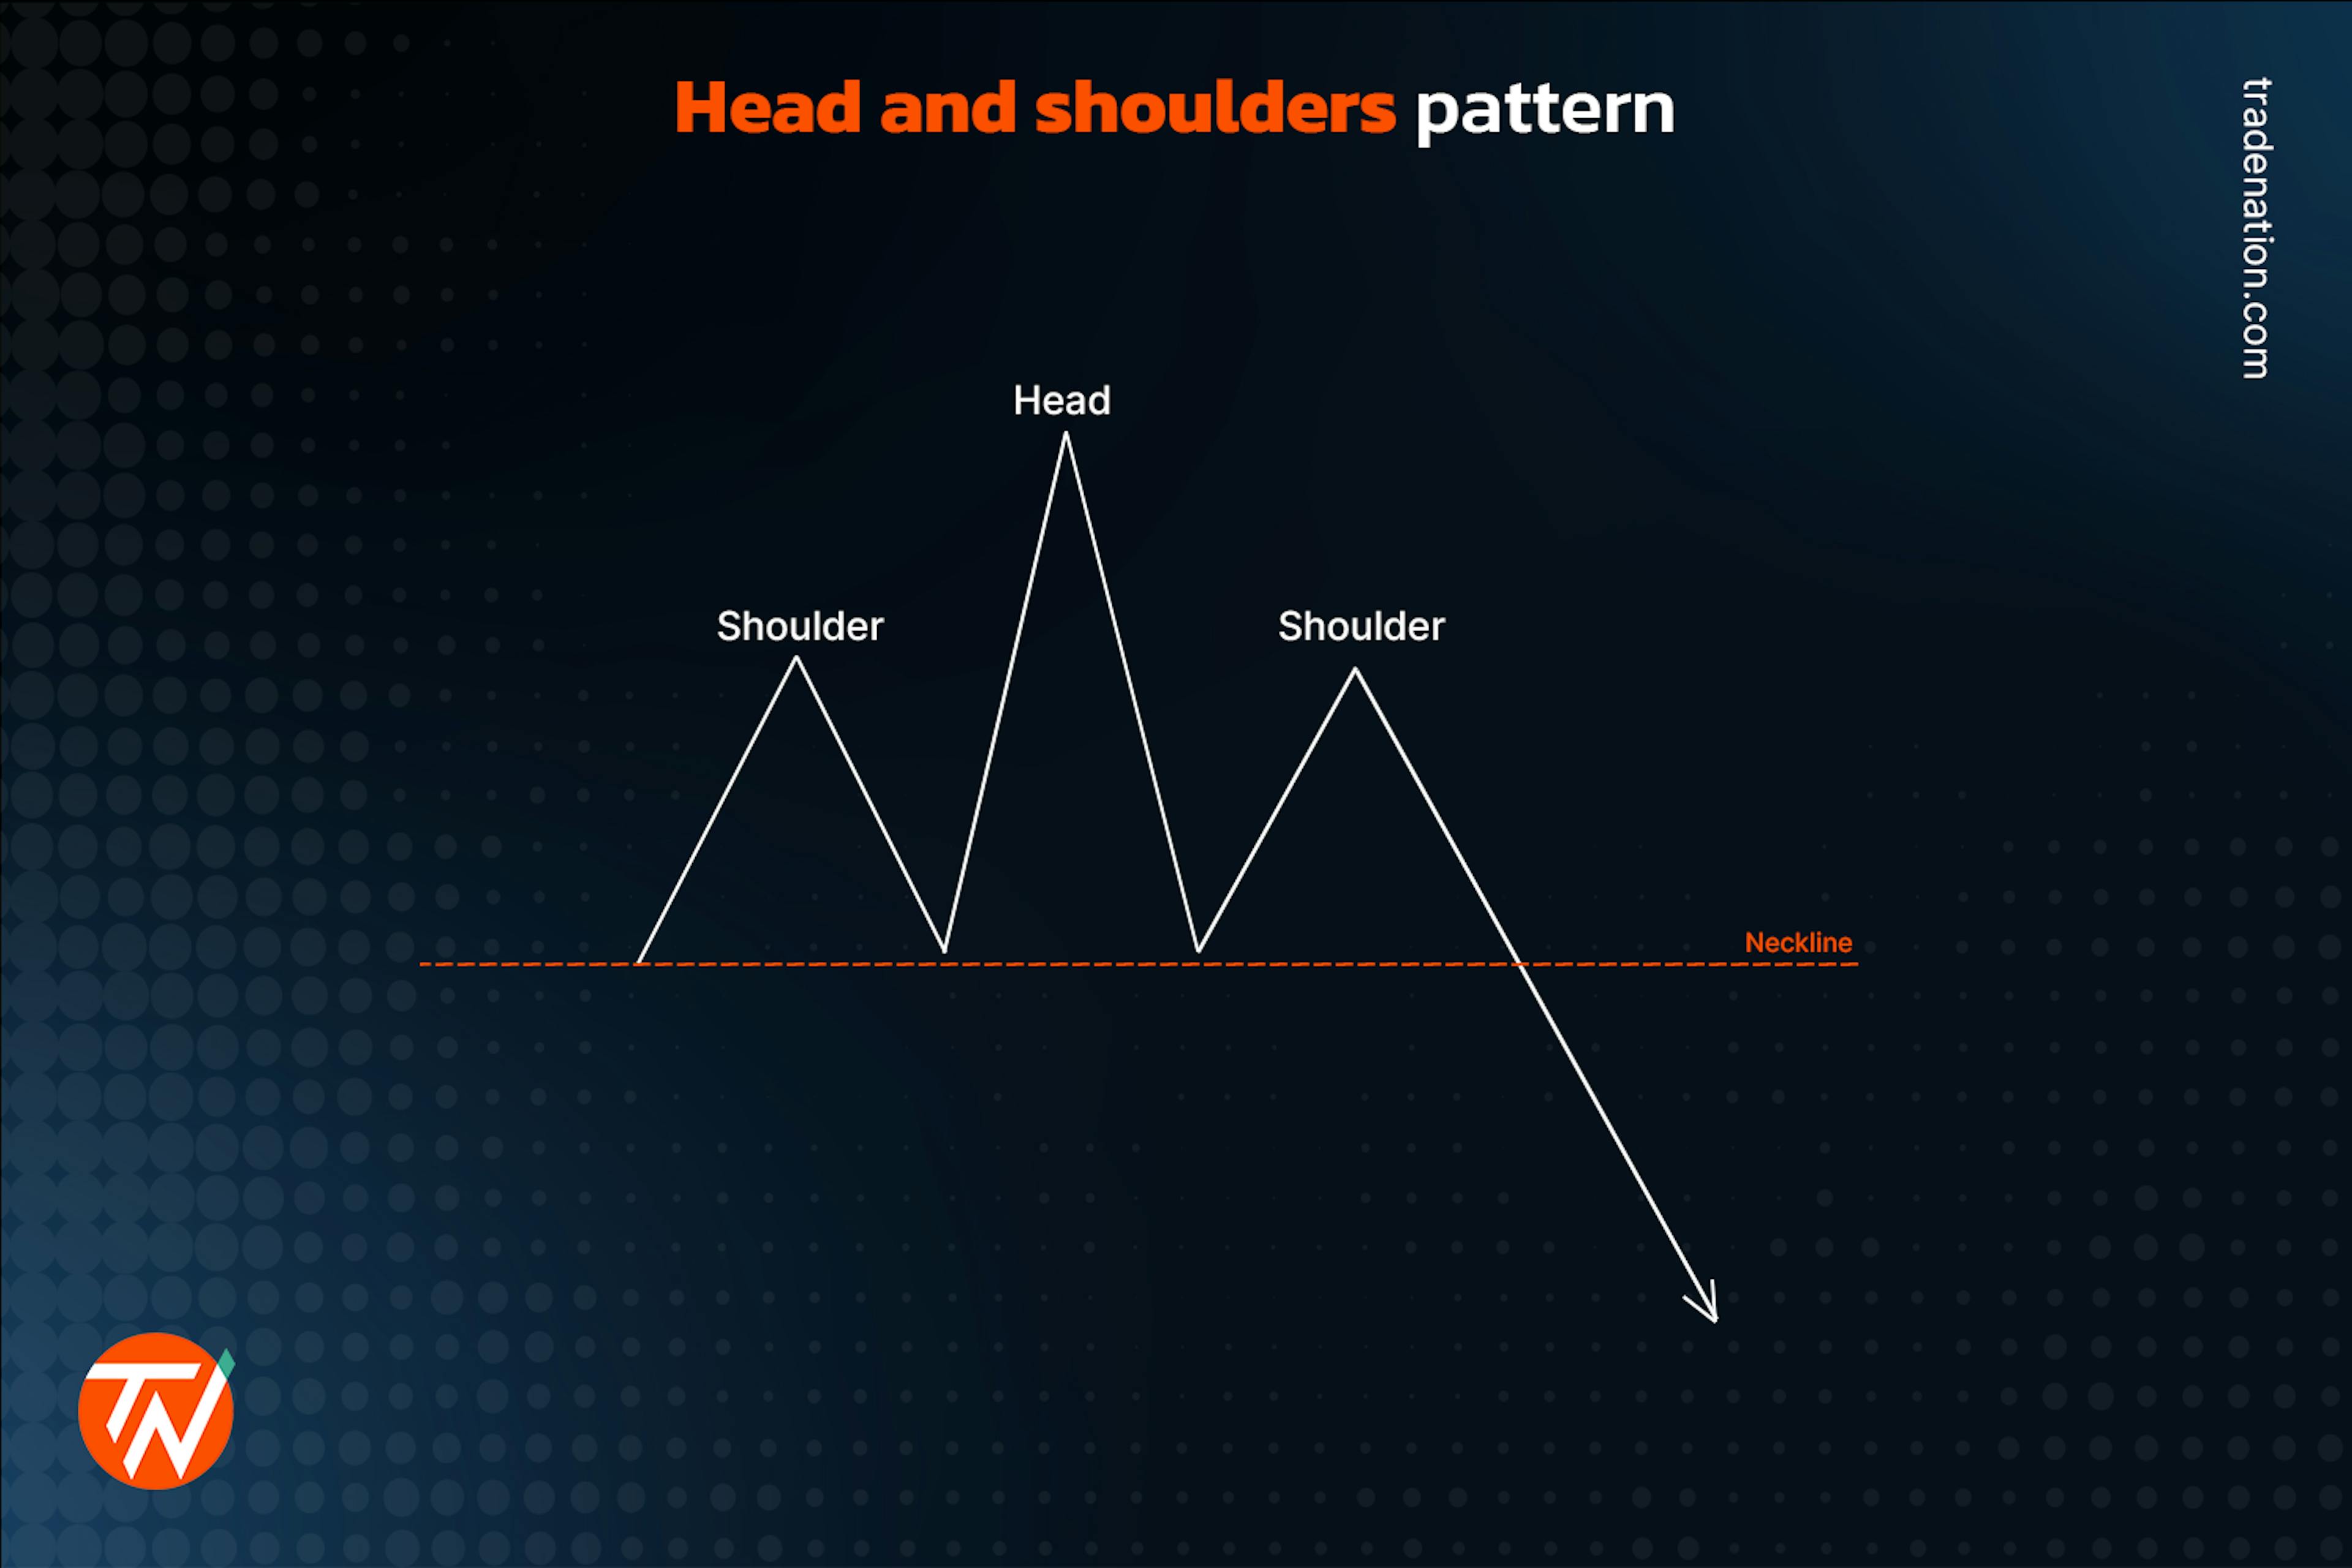 Head and shoulder pattern in trading